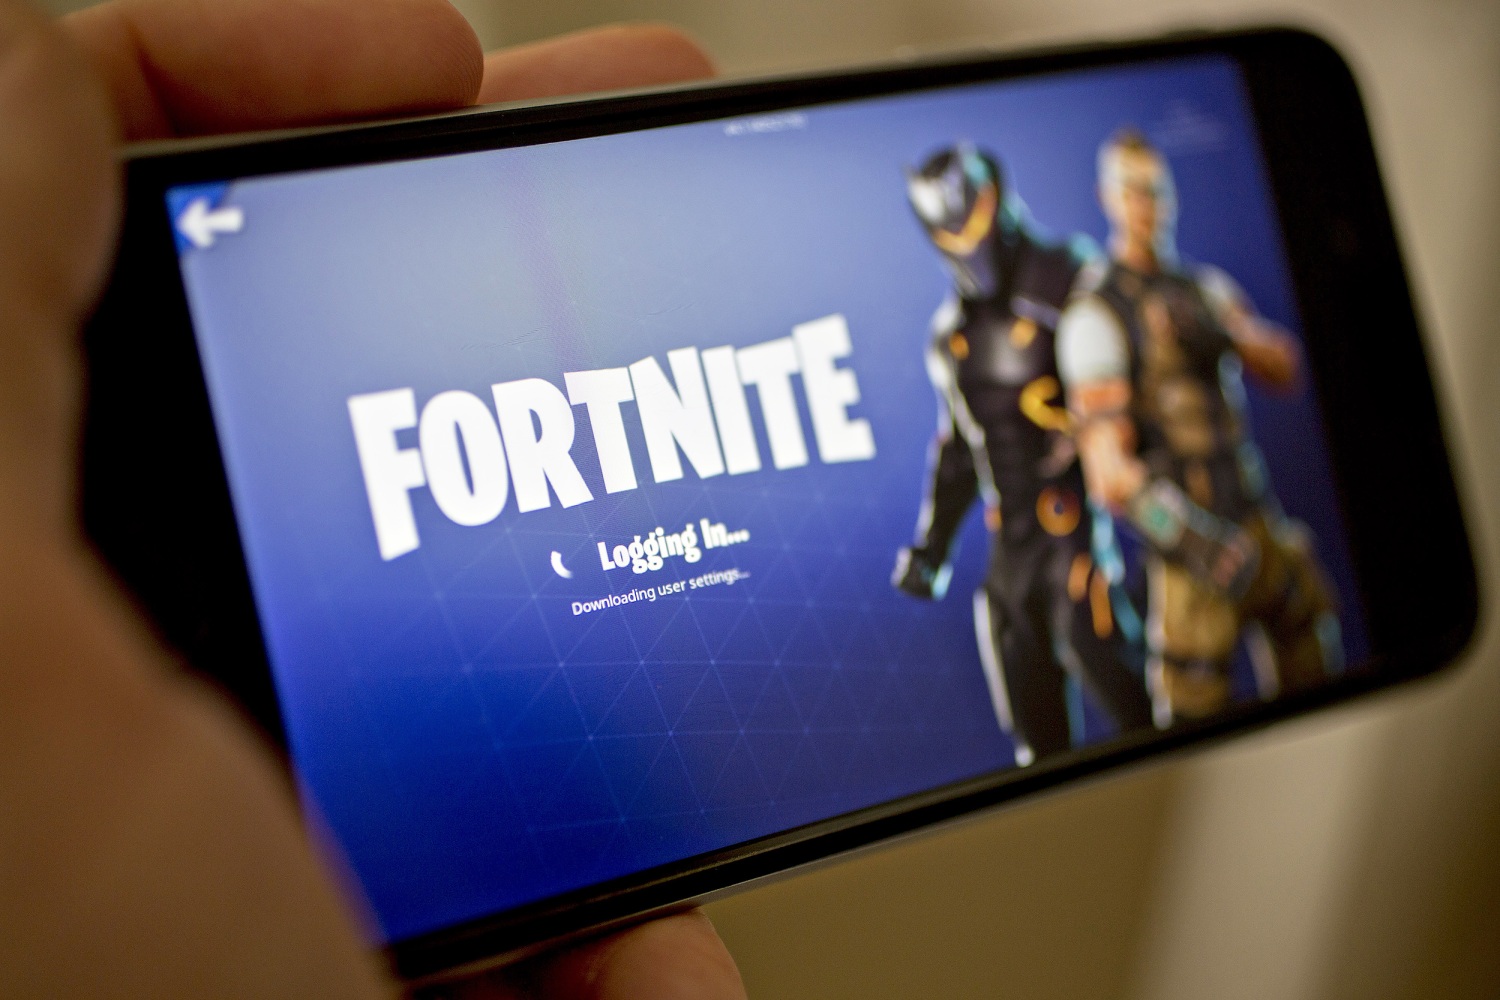 What is the new Fortnite craze?